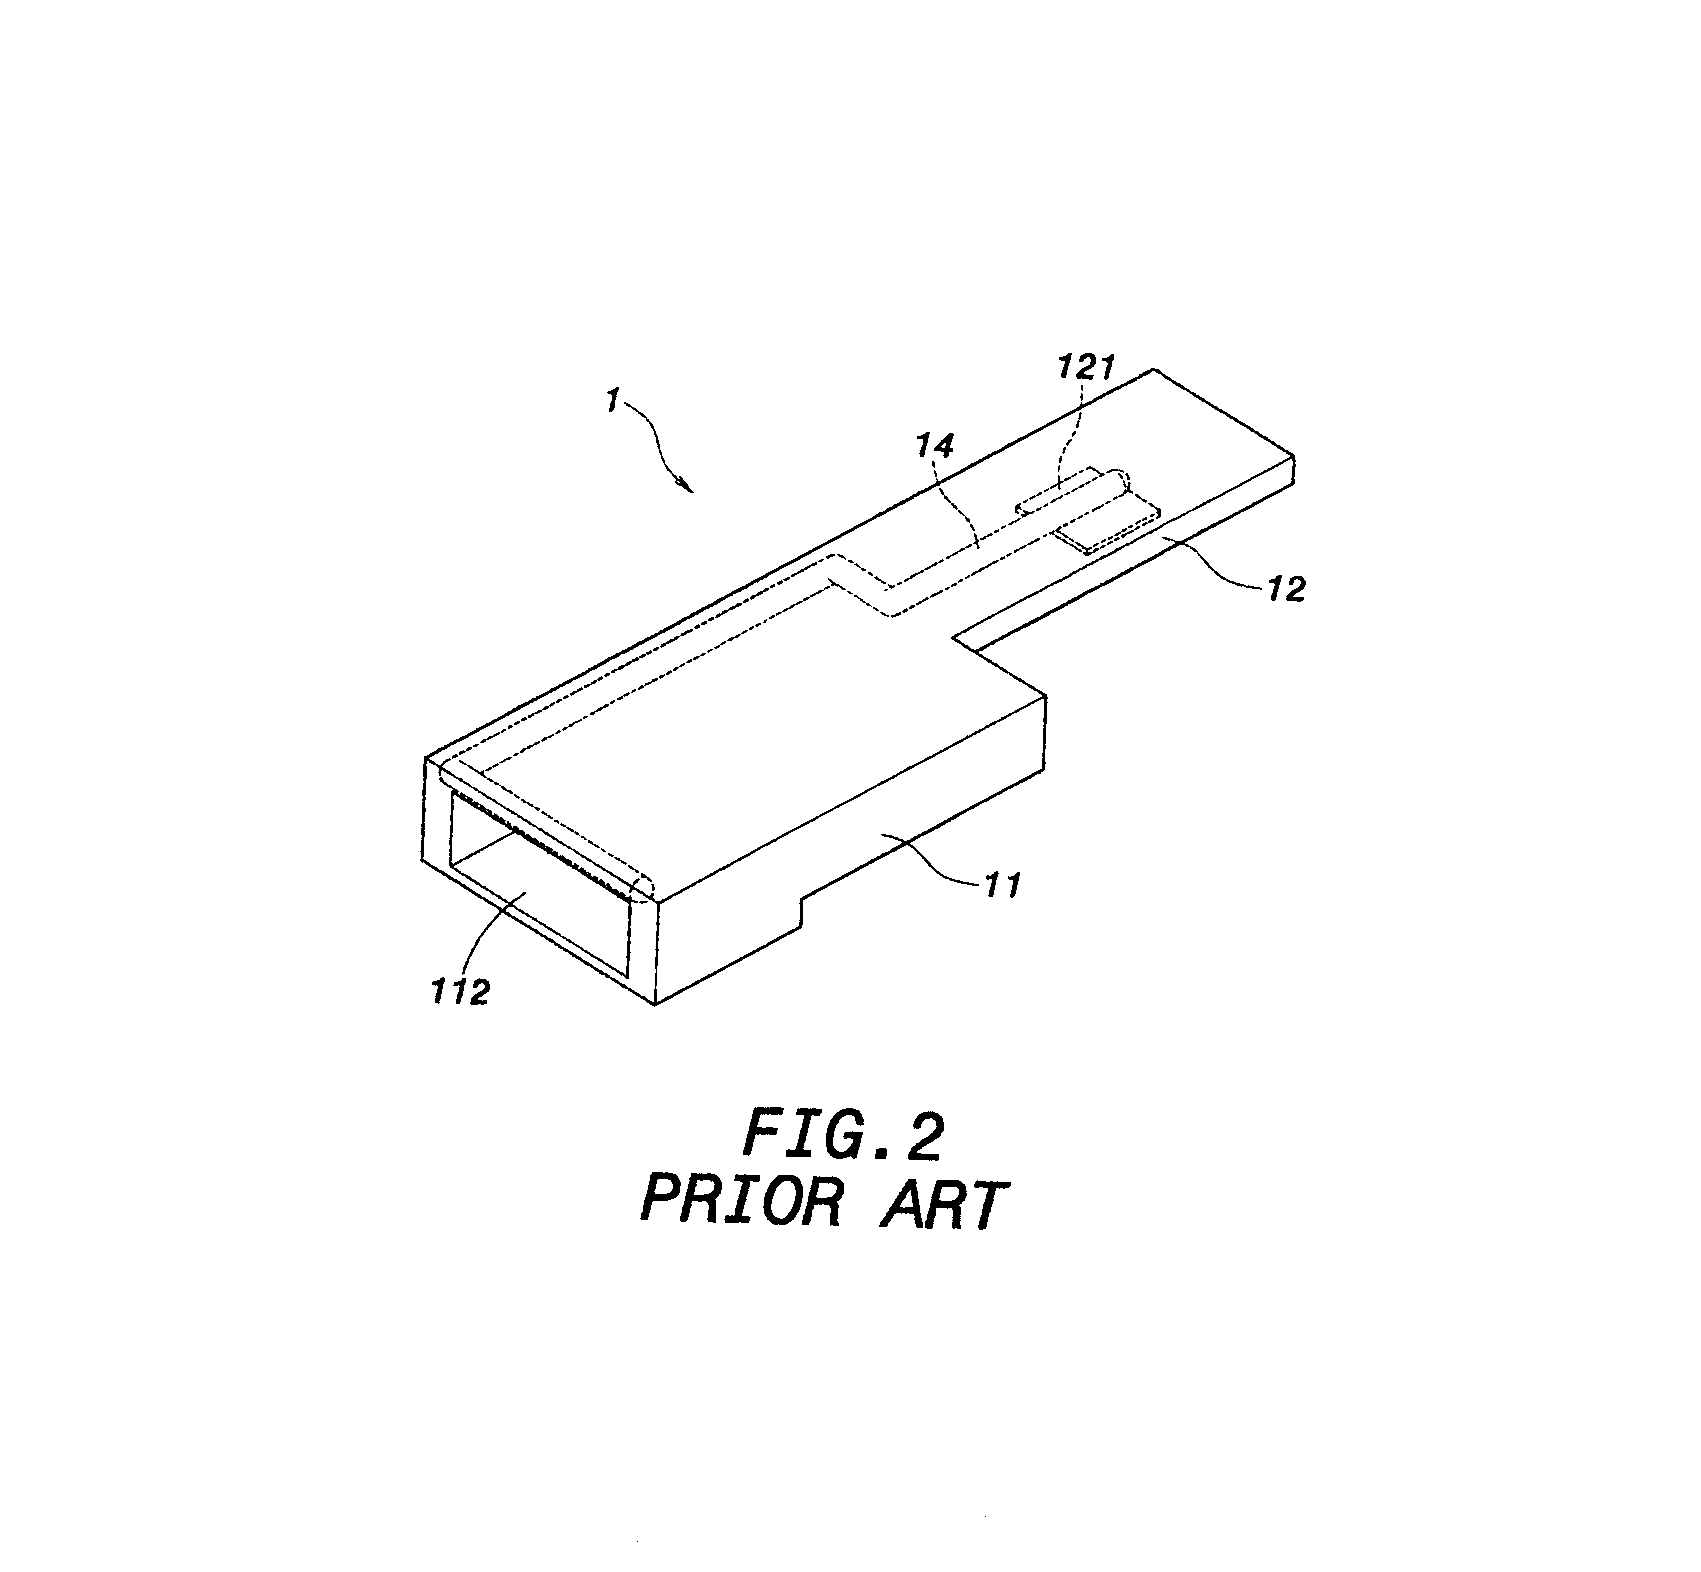 Multi-opening heat-dissipation device for high-power electronic components